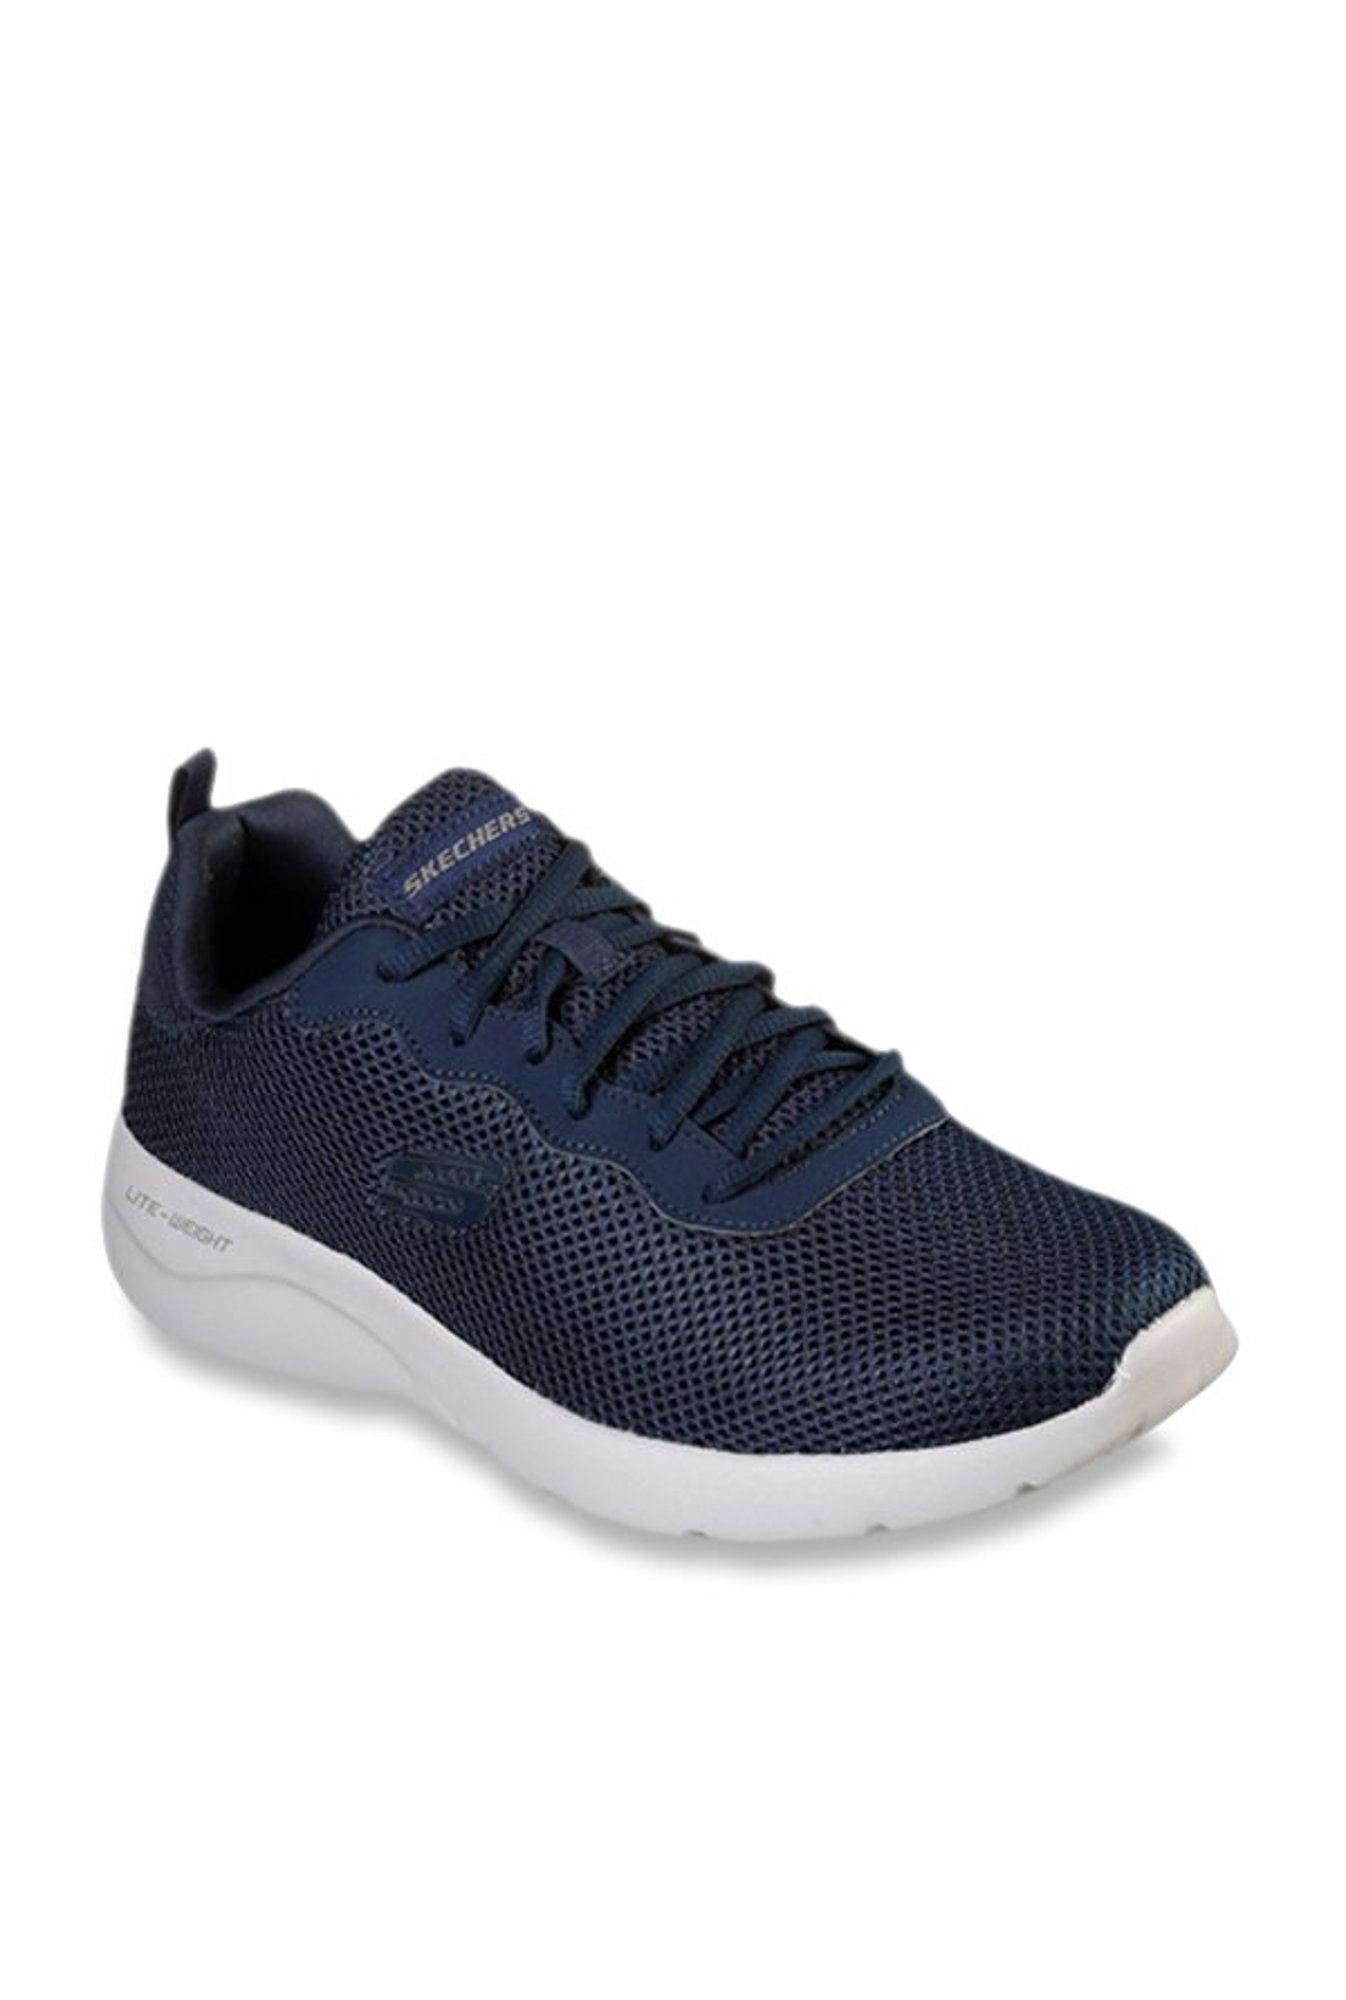 skechers dynamight lifestyle